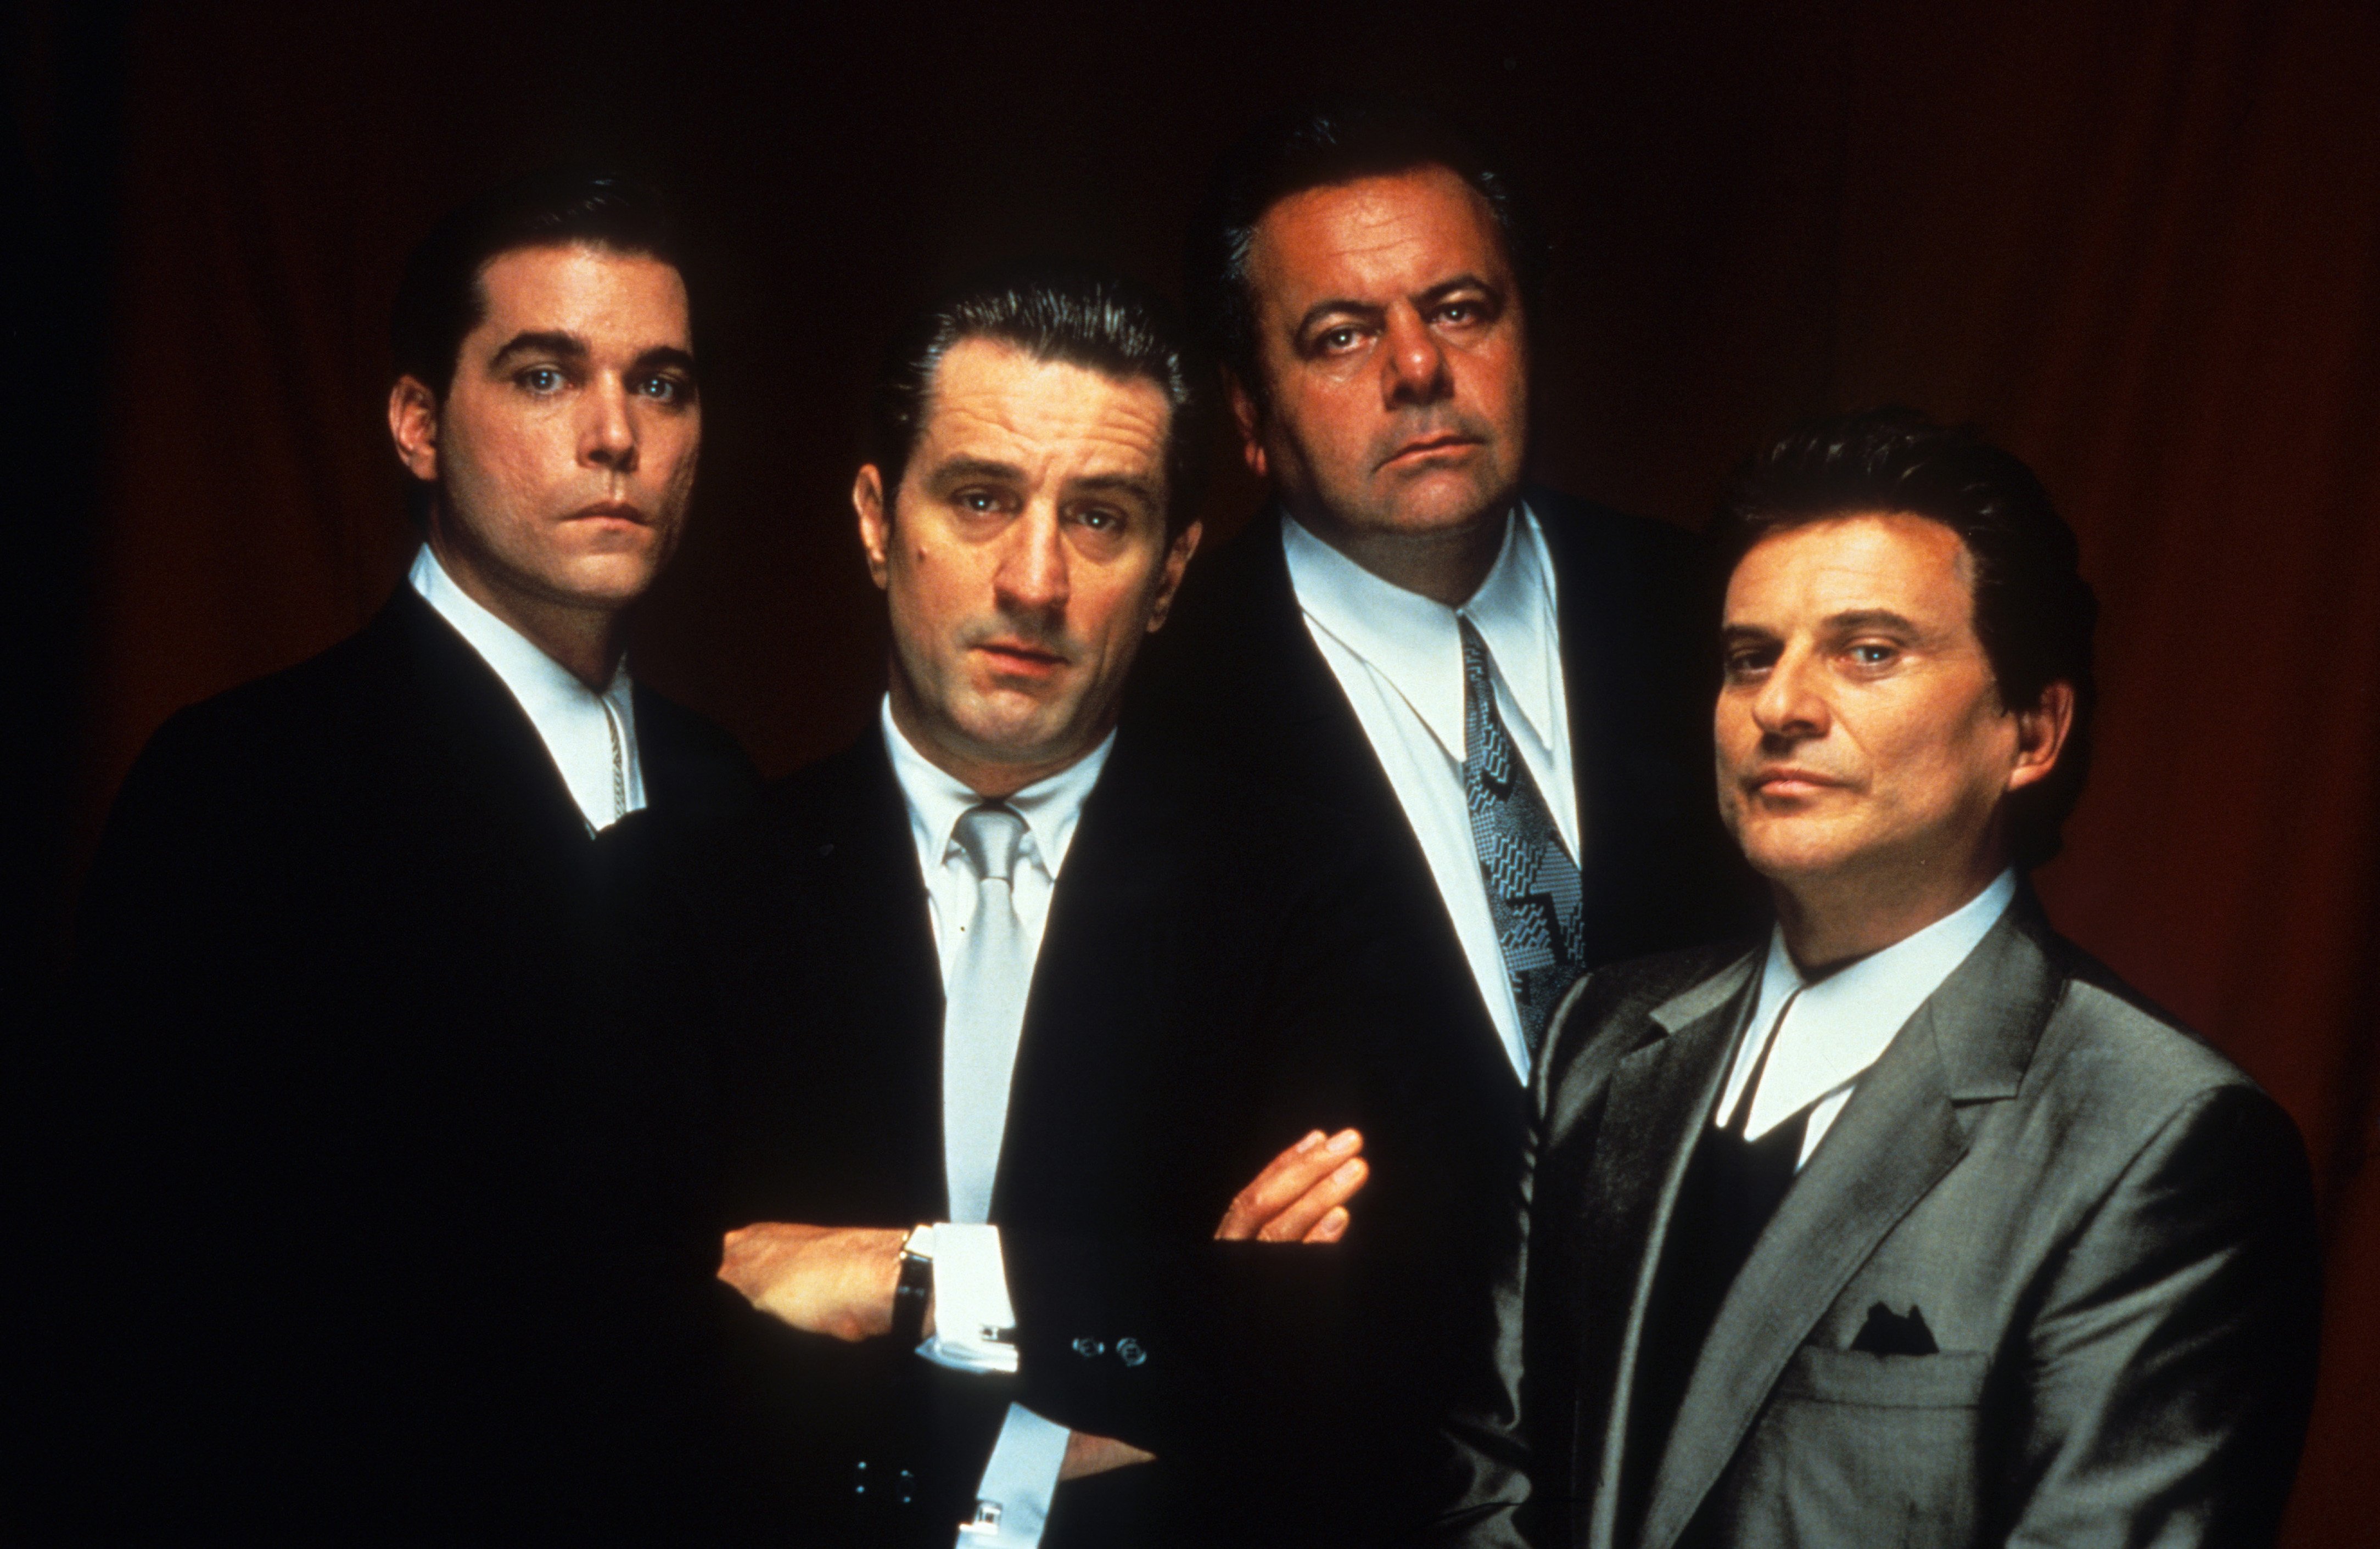 Ray Liotta, Robert De Niro, Paul Sorvino and Joe Pesci appear together for a promotional photo for 'Goodfellas'